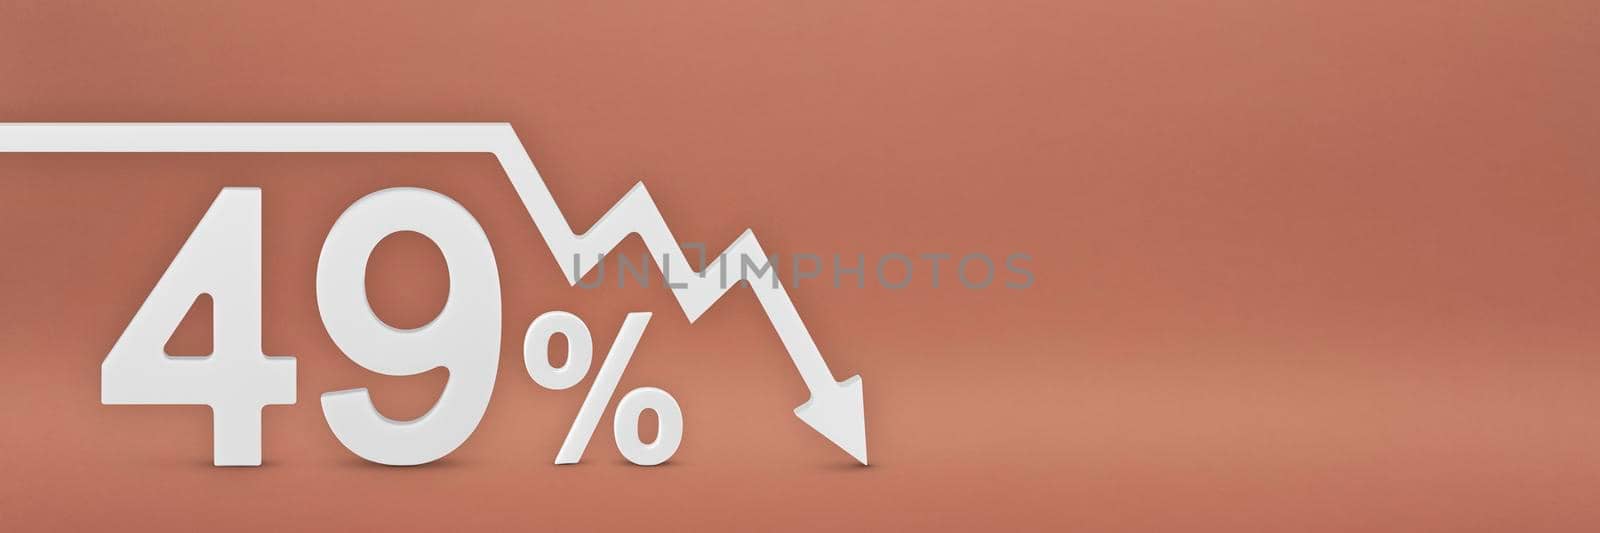 forty-nine percent, the arrow on the graph is pointing down. Stock market crash, bear market, inflation.Economic collapse, collapse of stocks.3d banner,49 percent discount sign on a red background. by SERSOL